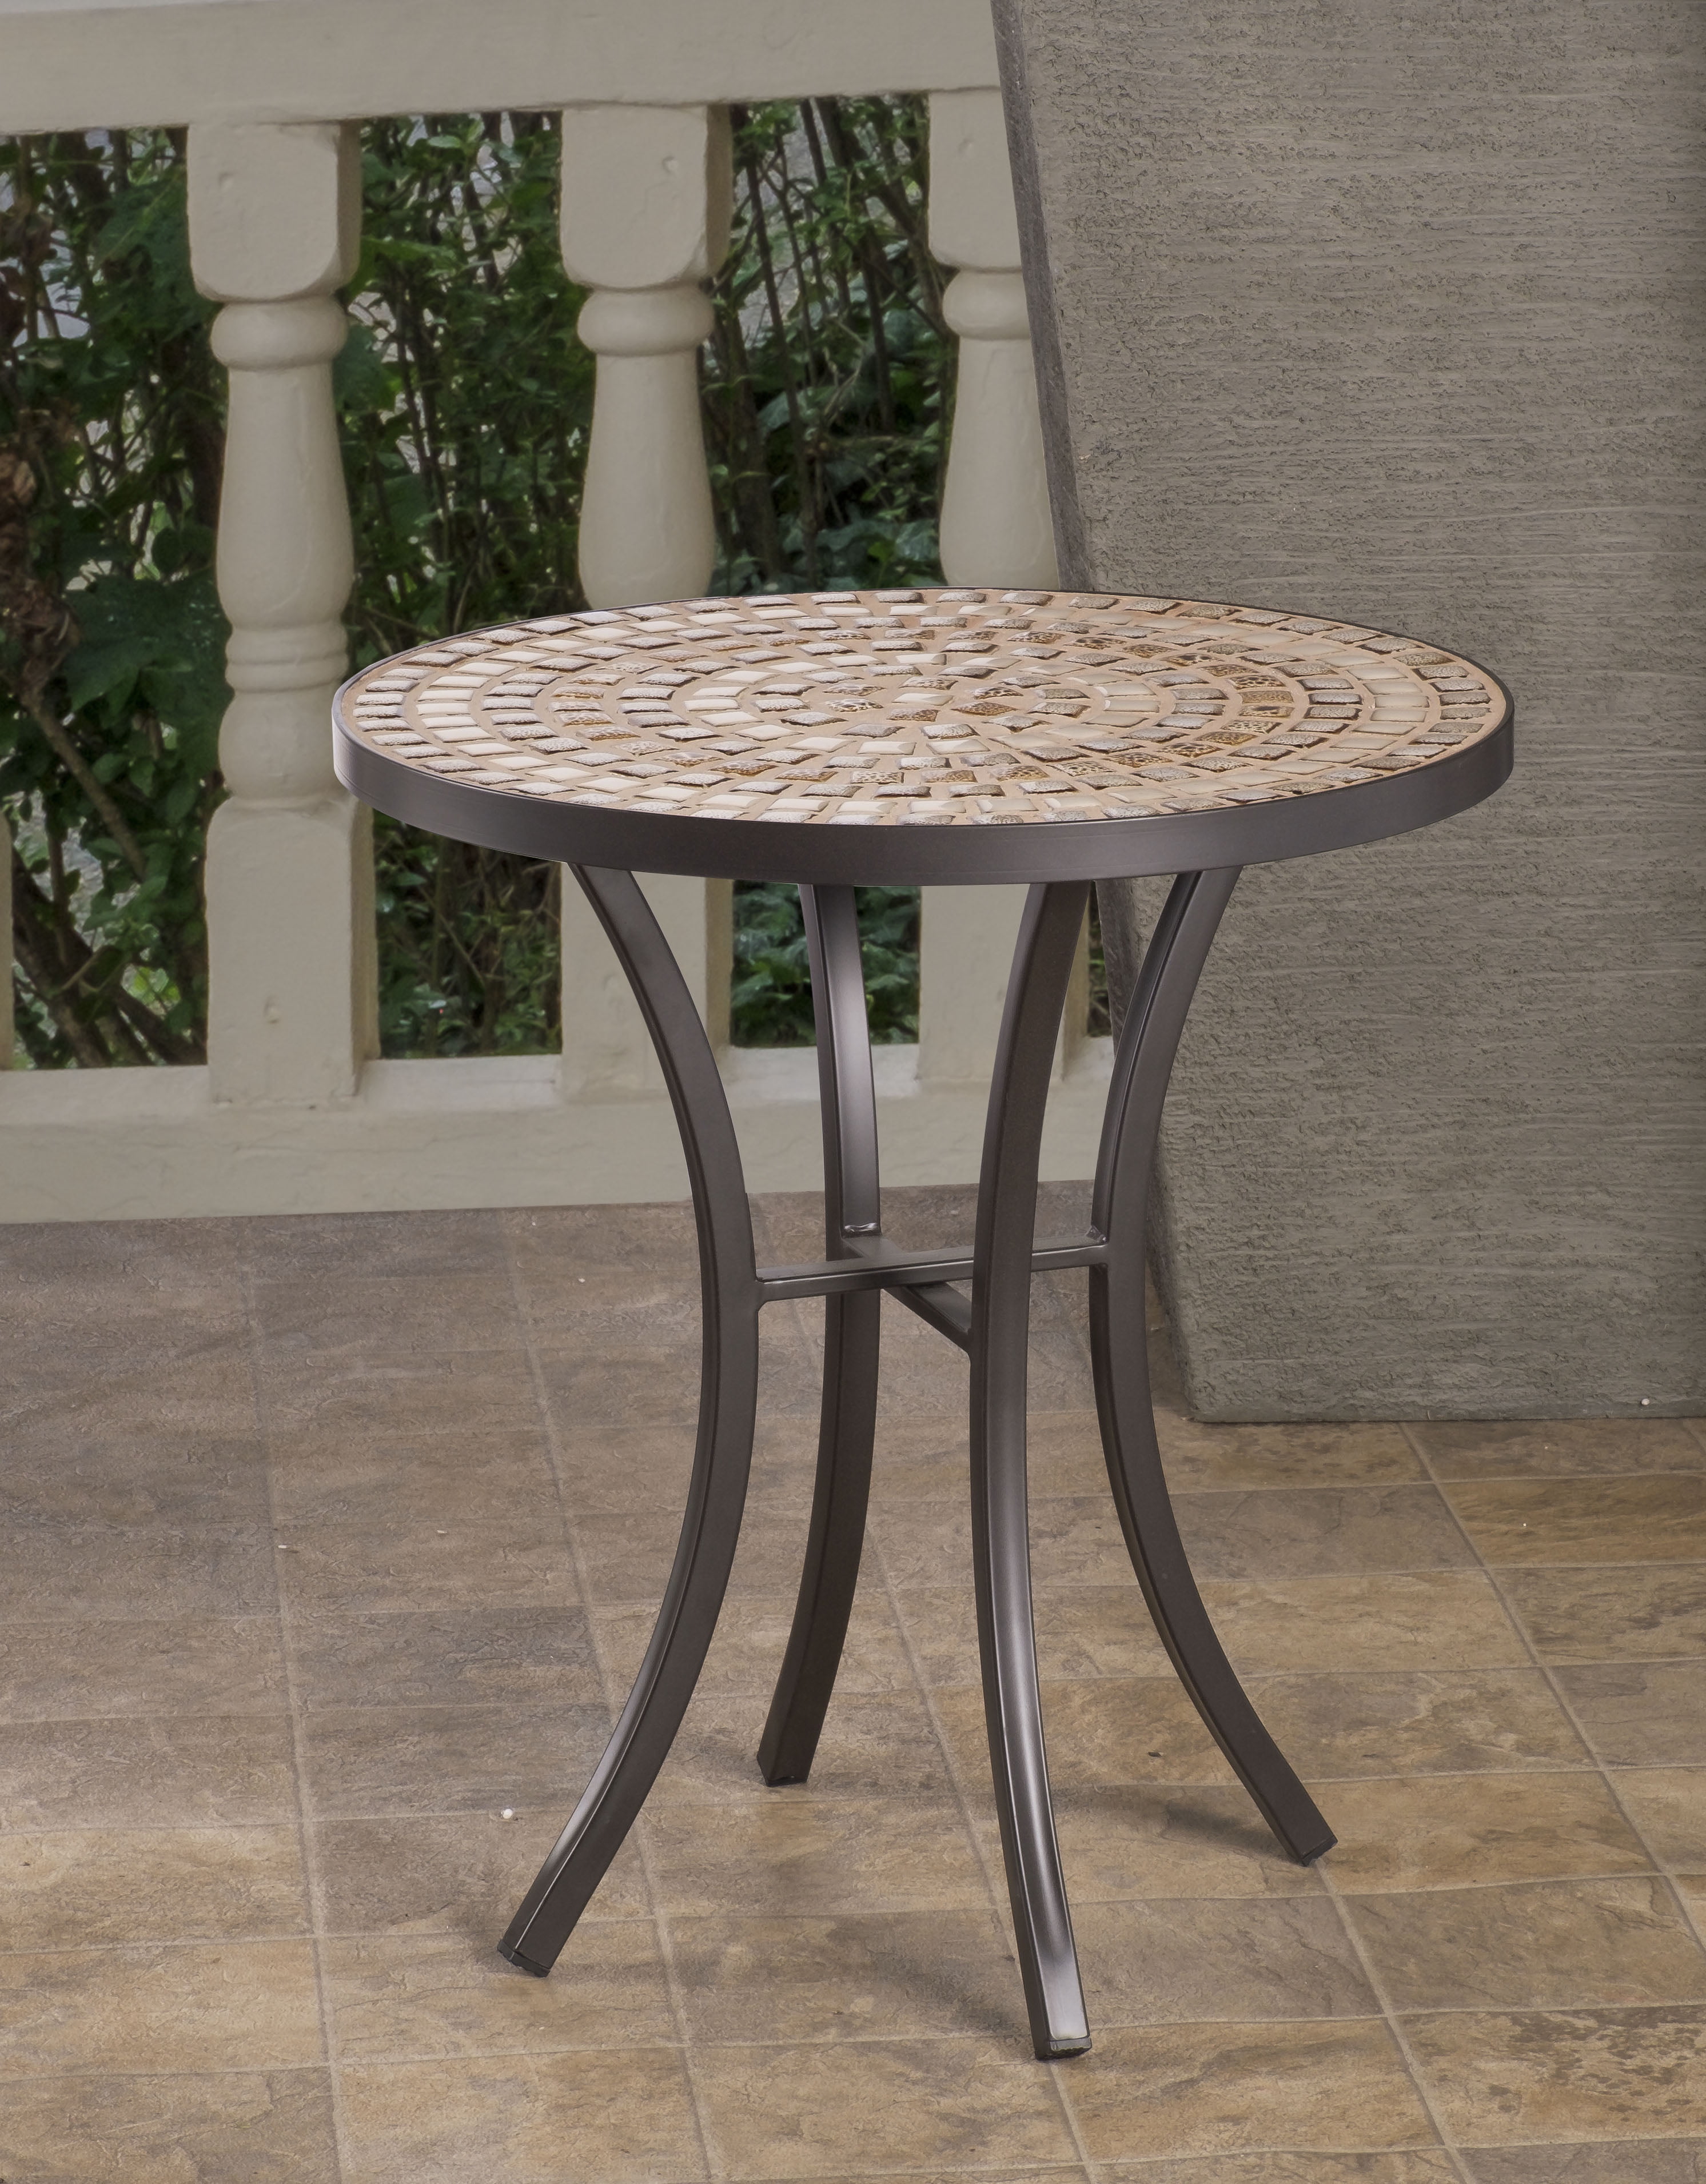 Round Ceramic Mosaic Outdoor Side Table, Mosaic Tiles Round Outdoor Coffee Table